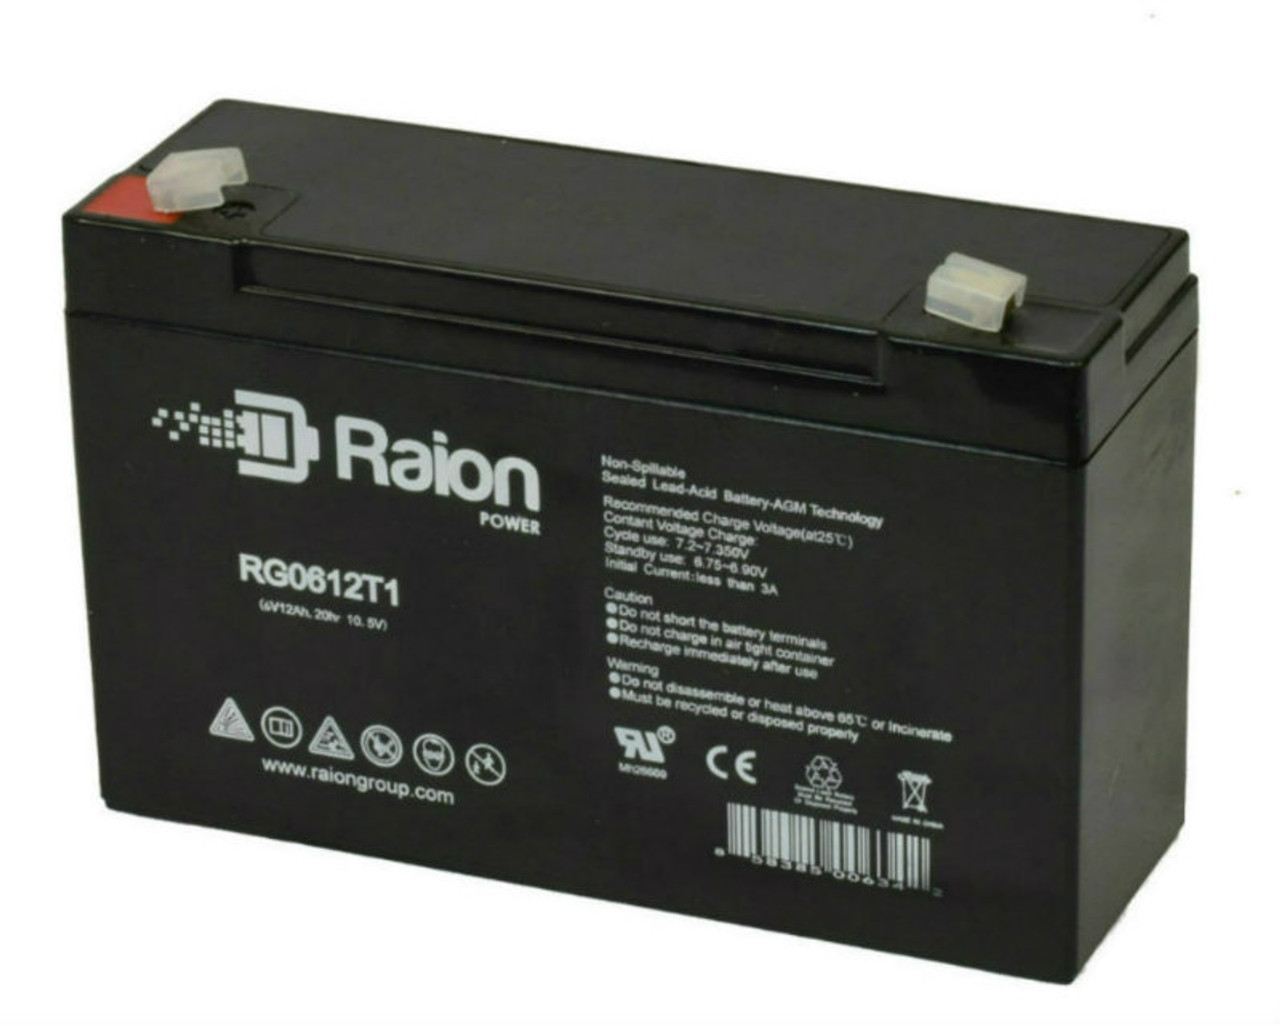 Raion Power RG06120T1 Replacement 6V 12Ah Emergency Light Battery for Teledyne 2BR6S16